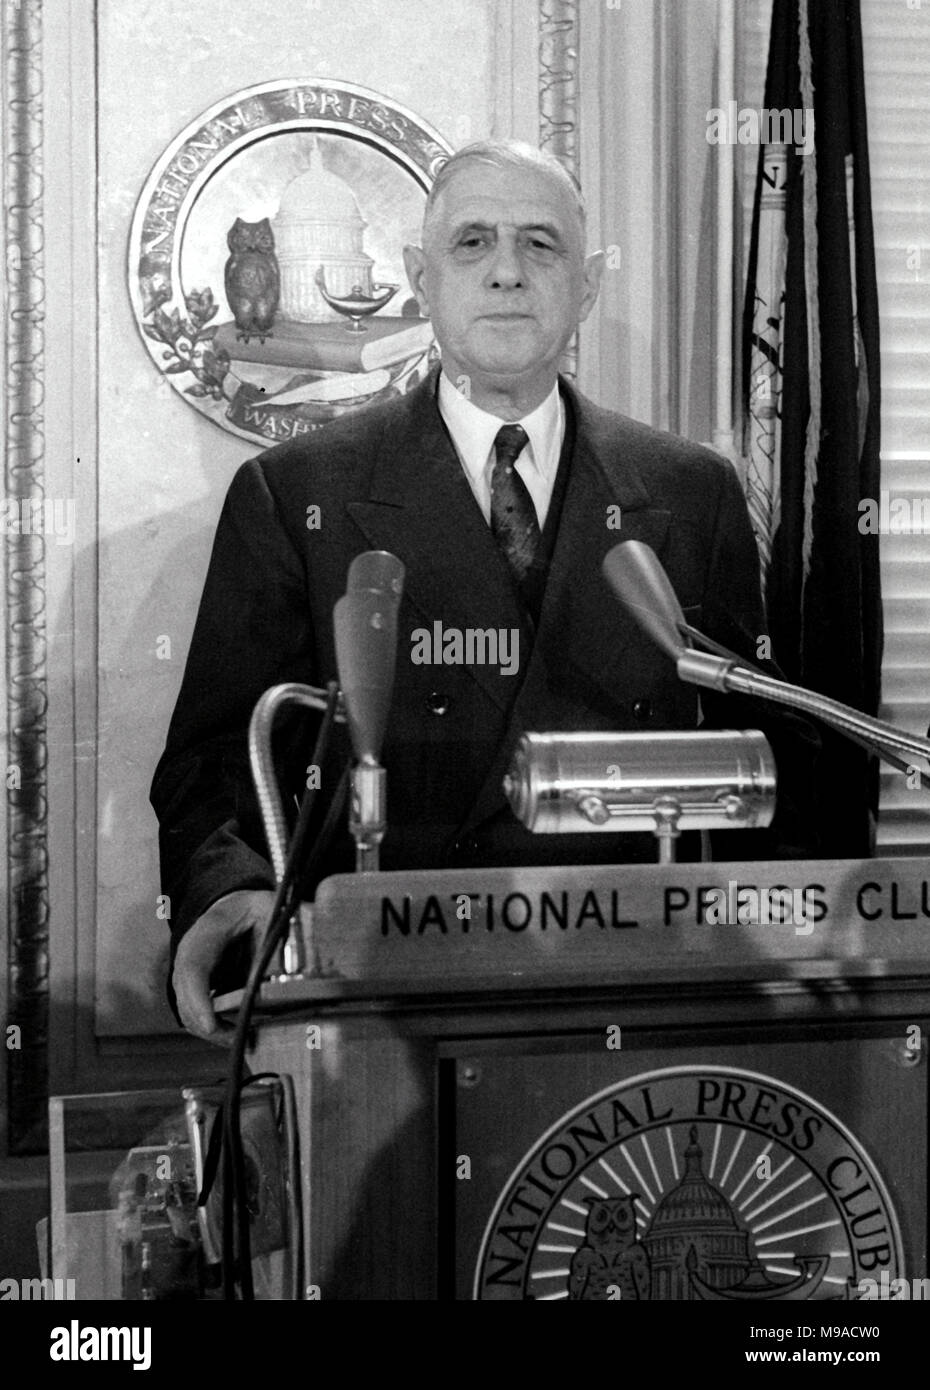 President Charles de Gaulle of France speaks at the National Press Club in Washington, DC on April 23, 1960. President de Gaulle is in Washington for a State visit to focus on talks with United States President Dwight D. Eisenhower in anticipation of the upcoming Big Four summit in May in Paris. It will be the first such meeting of leaders from the US, Great Britain, France, and the Soviet Union since World War II. Credit: Benjamin E. 'Gene' Forte / CNP     - NO WIRE SERVICE · Photo: Benjamin E. 'gene' Forte/Consolidated News Photos/Benjamin E. 'Gene' Forte - CNP Stock Photo